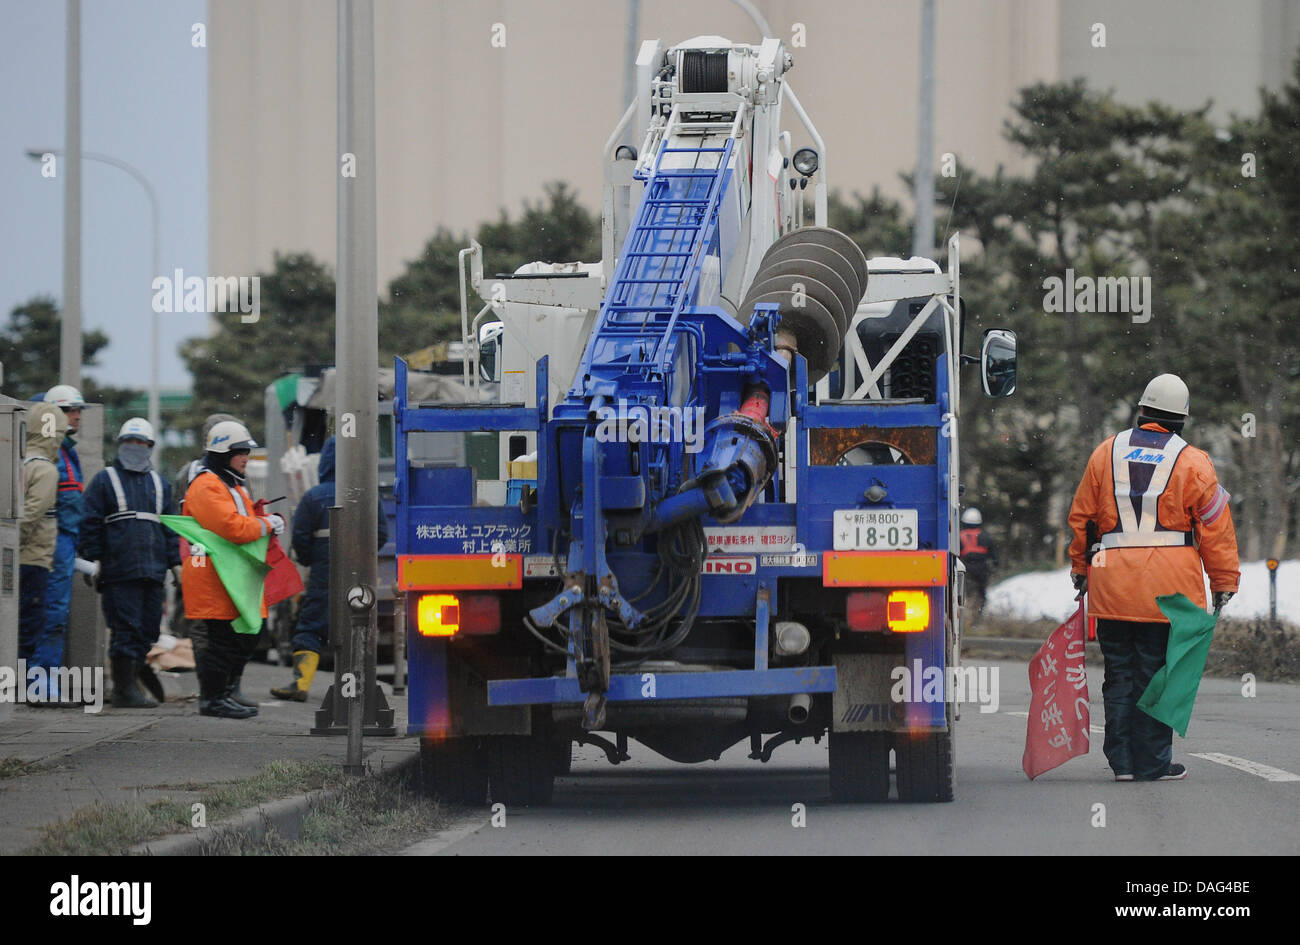 Employees repair power lines near the harbour Hachinohe, Japan, 17 March 2011. The north region of Misawa struggles with petrol shortages. Fuel oil, electricity and water supplies are stable. Photo: HANNIBAL Stock Photo